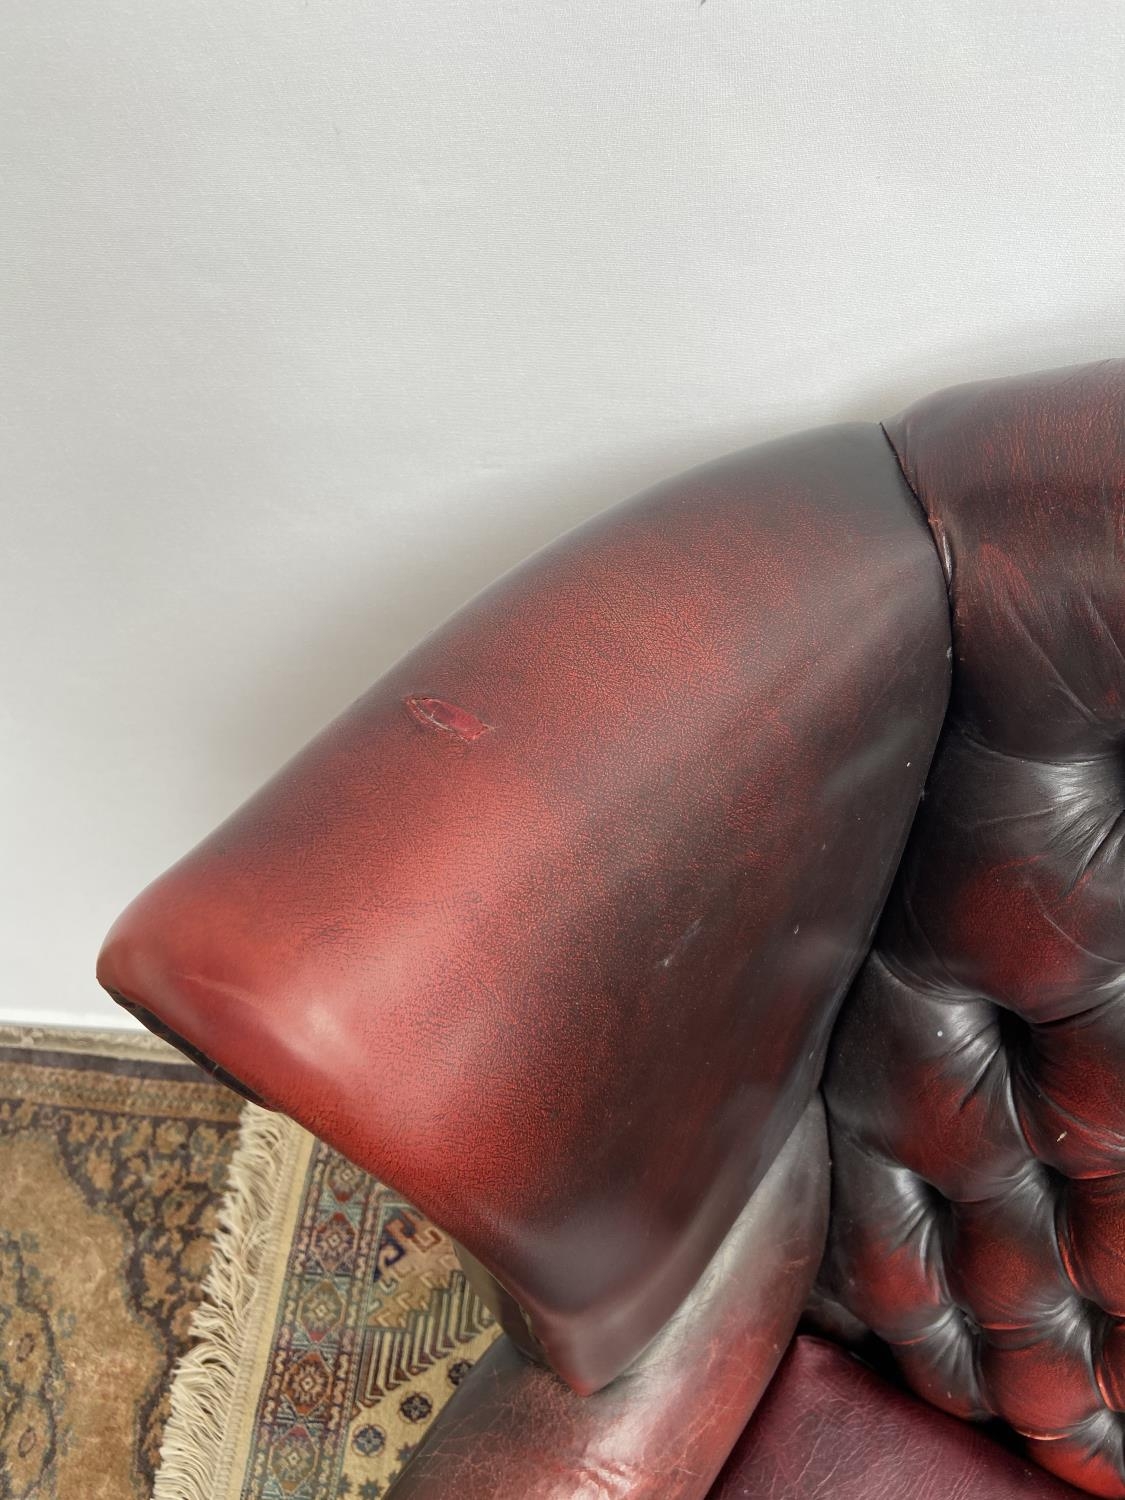 Antique chesterfield oxblood red gull wing arm chair. [107cm in height] - Image 4 of 7